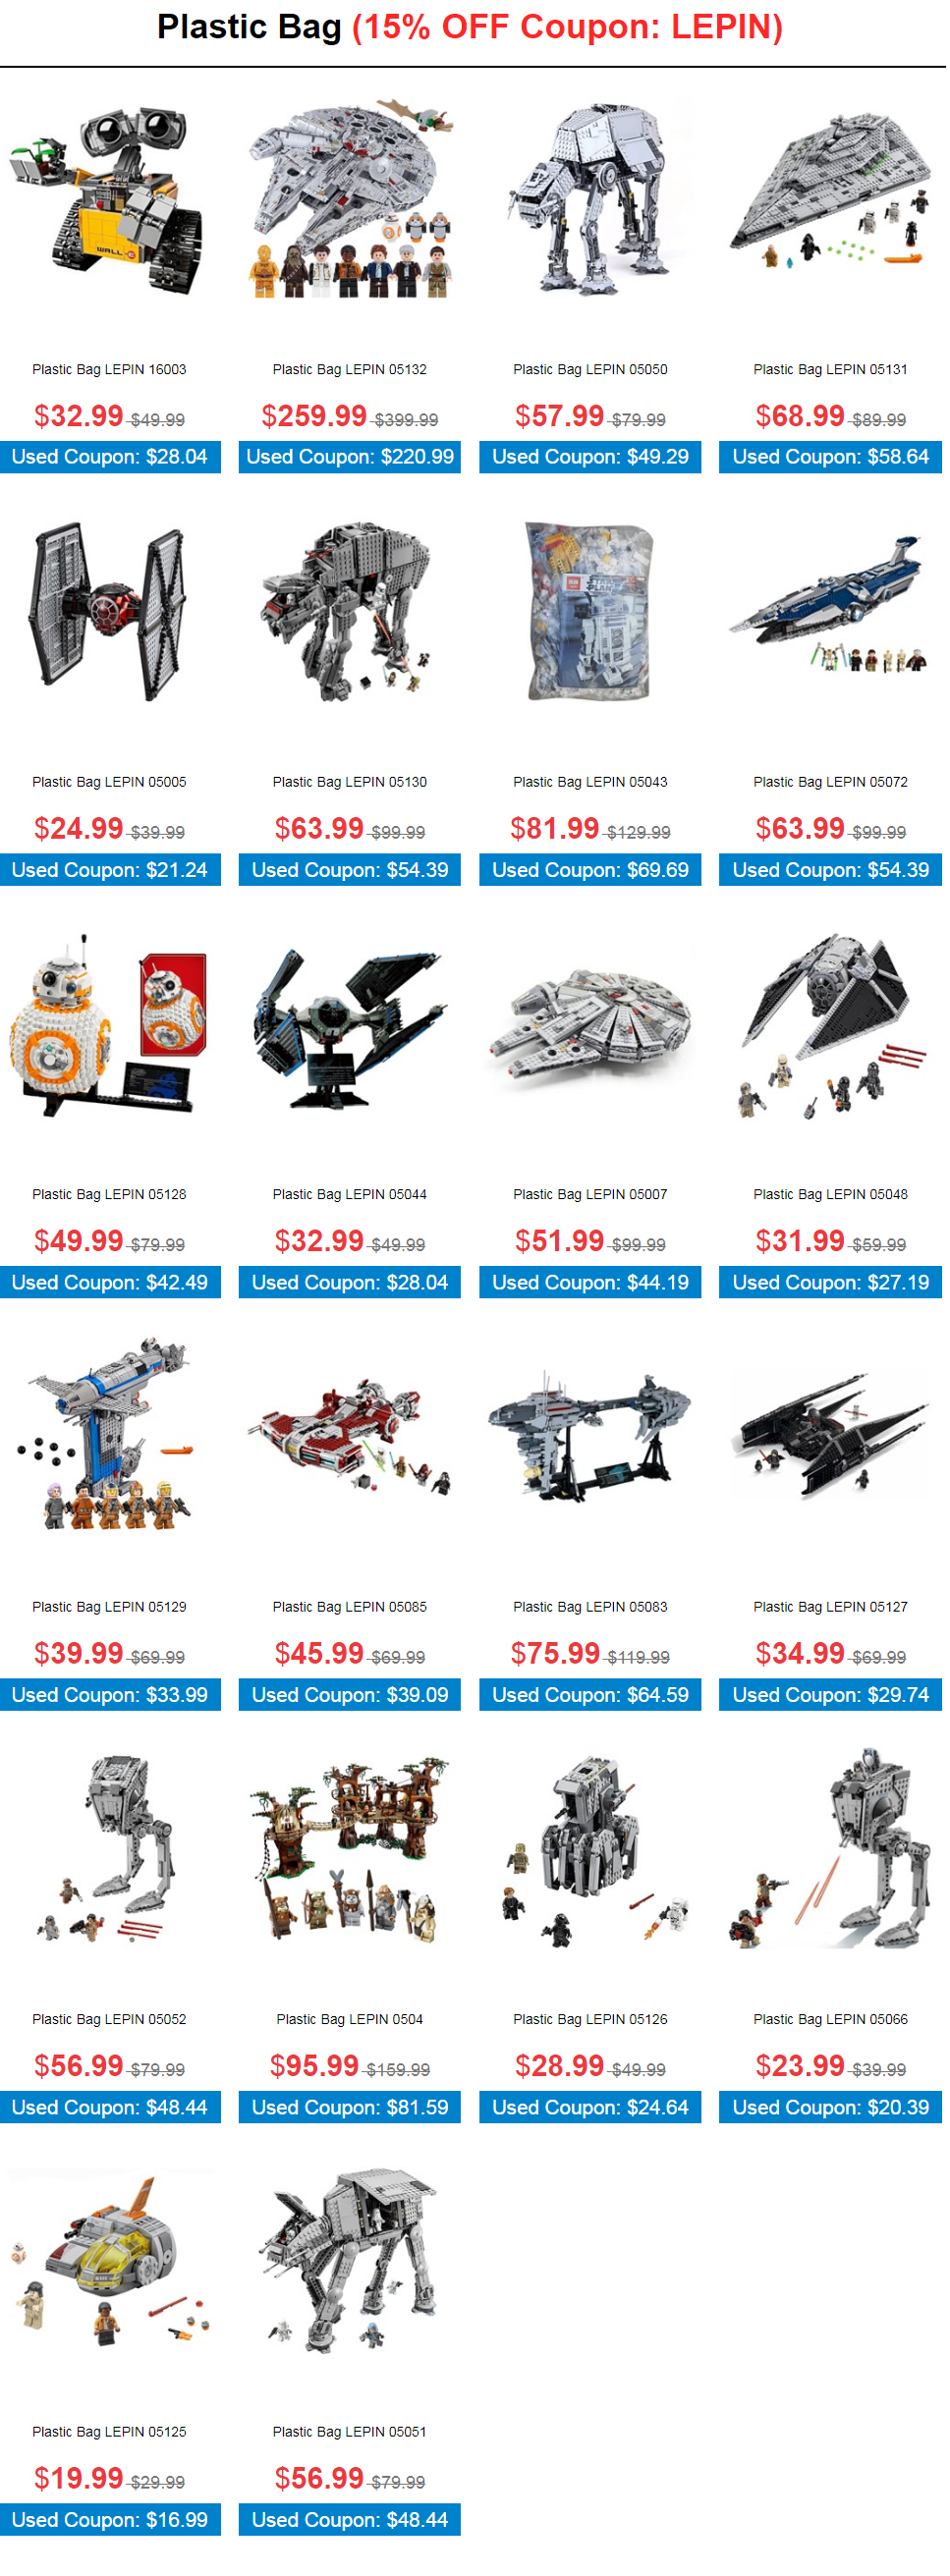 LEPIN Building Toys Up to 50%+Extra 15% off Coupon